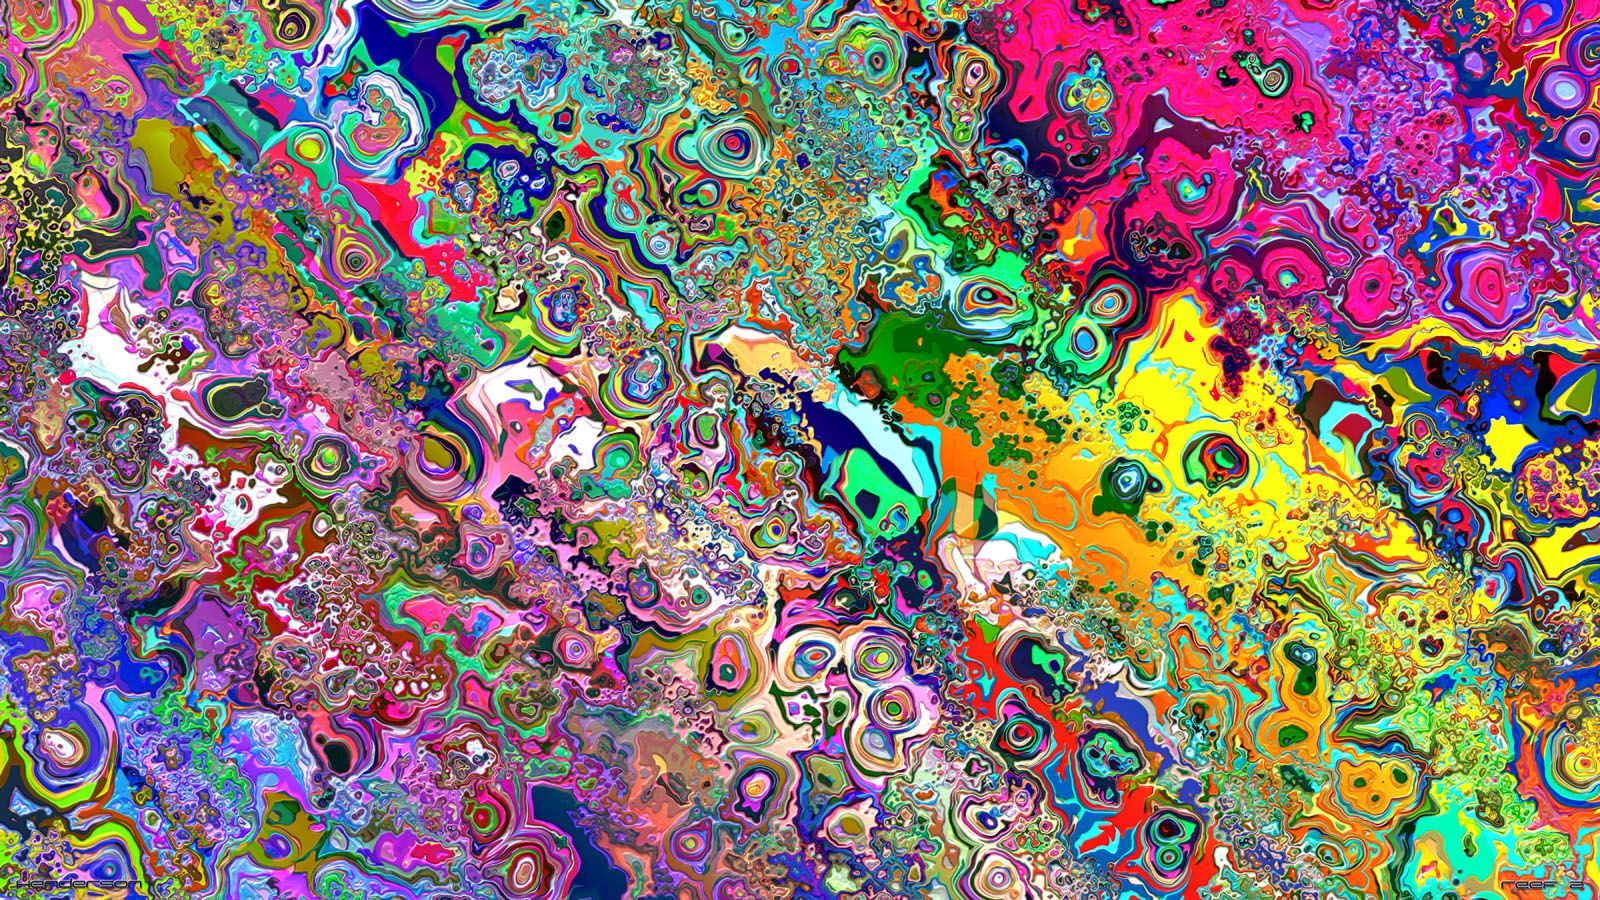 18683_1_miscellaneous_digital_art_trippy_colorful_trippy_colorful.jpg